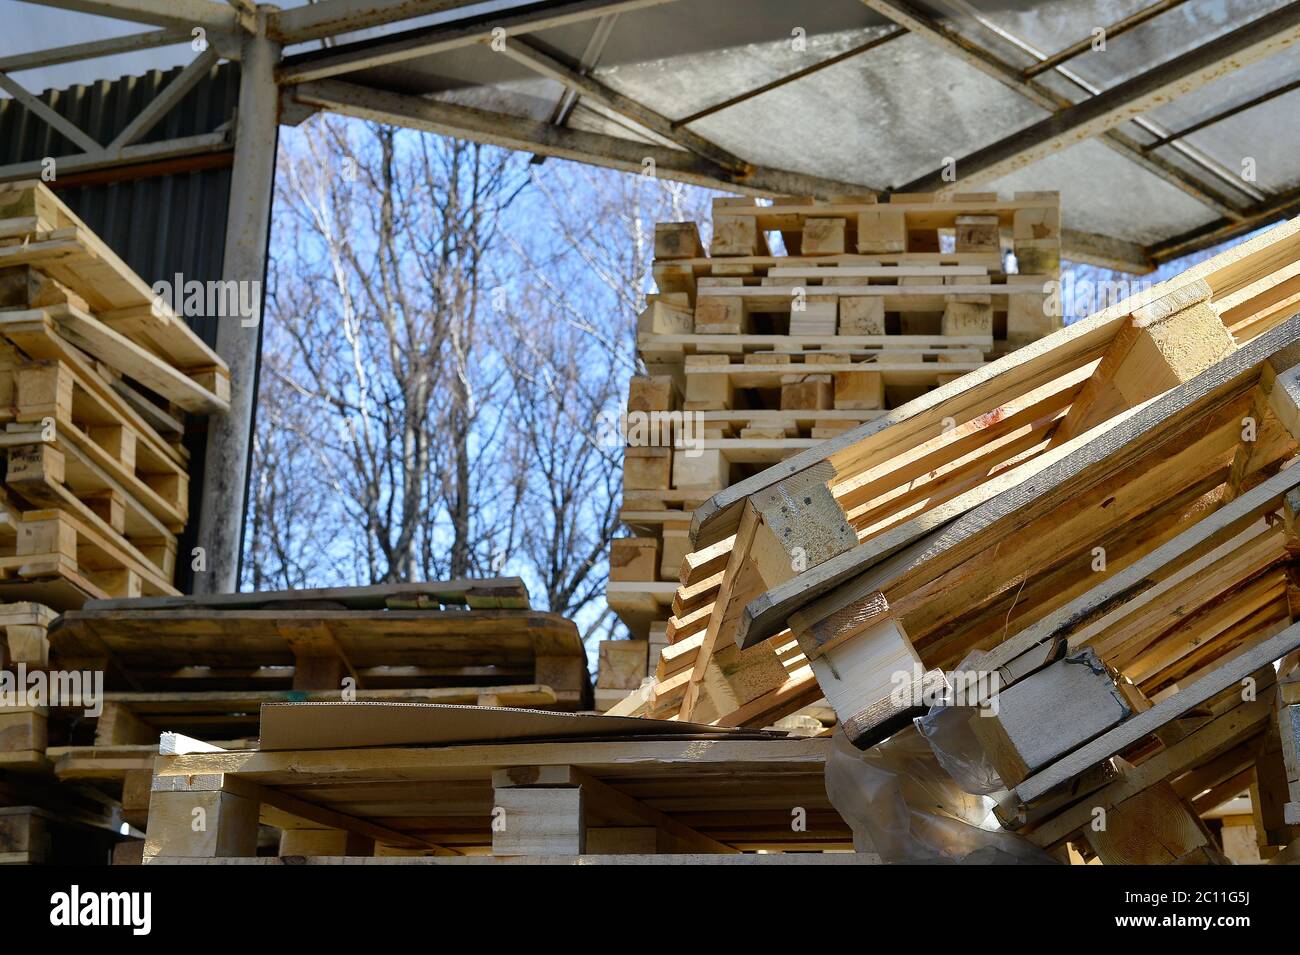 Waste wood from pallets stacked in the storage room Stock Photo